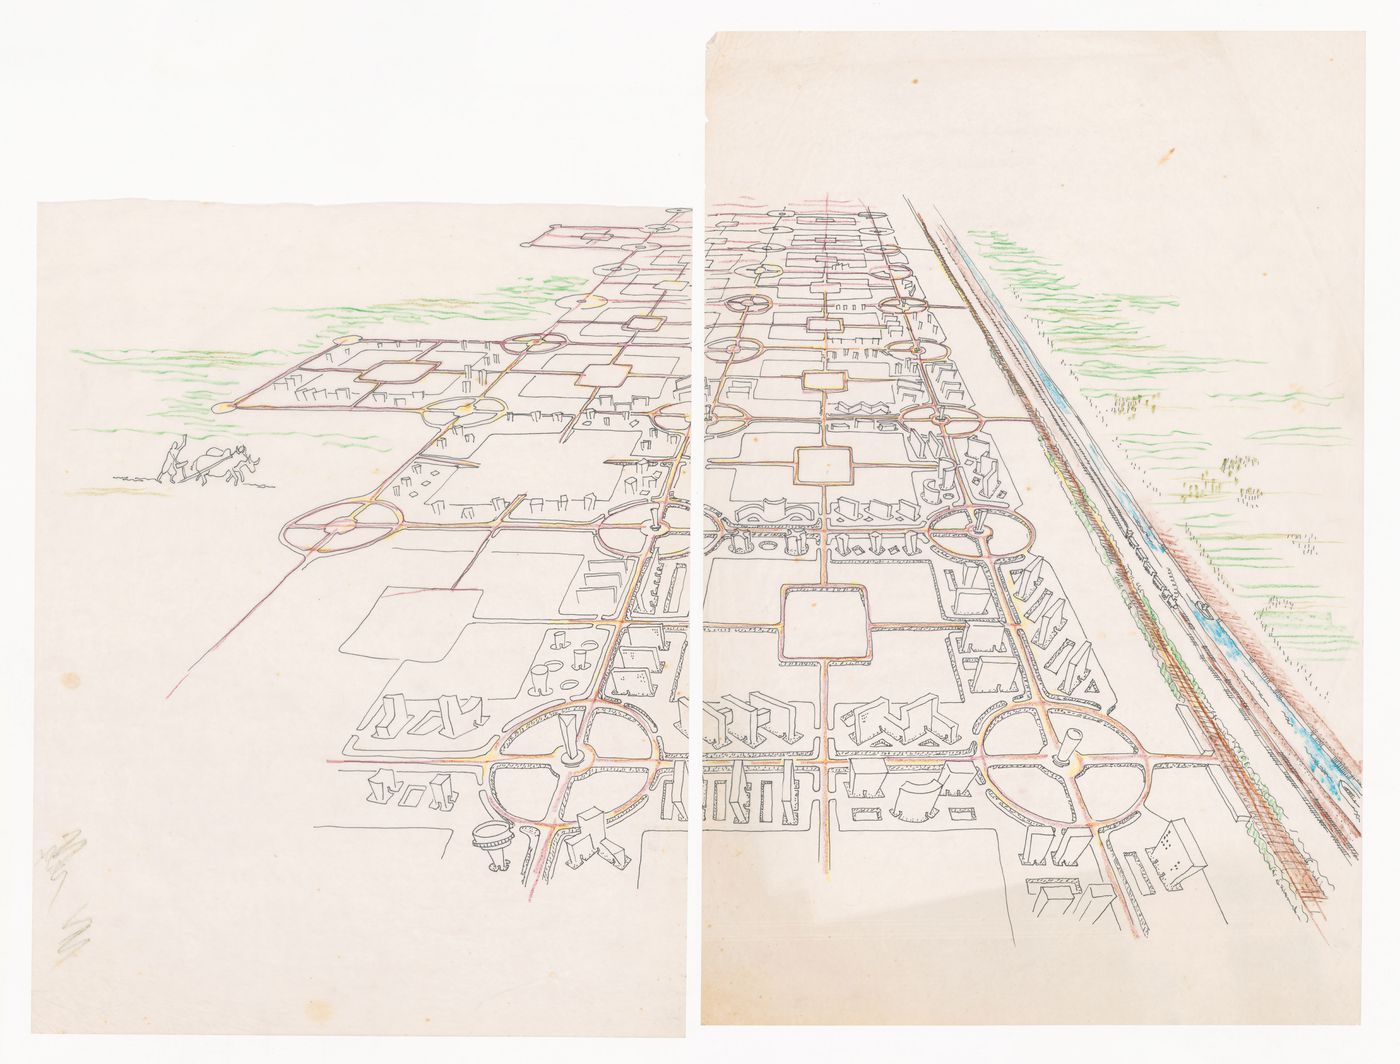 Perspective drawing of city blocks for Linear city, Chandigarh, India